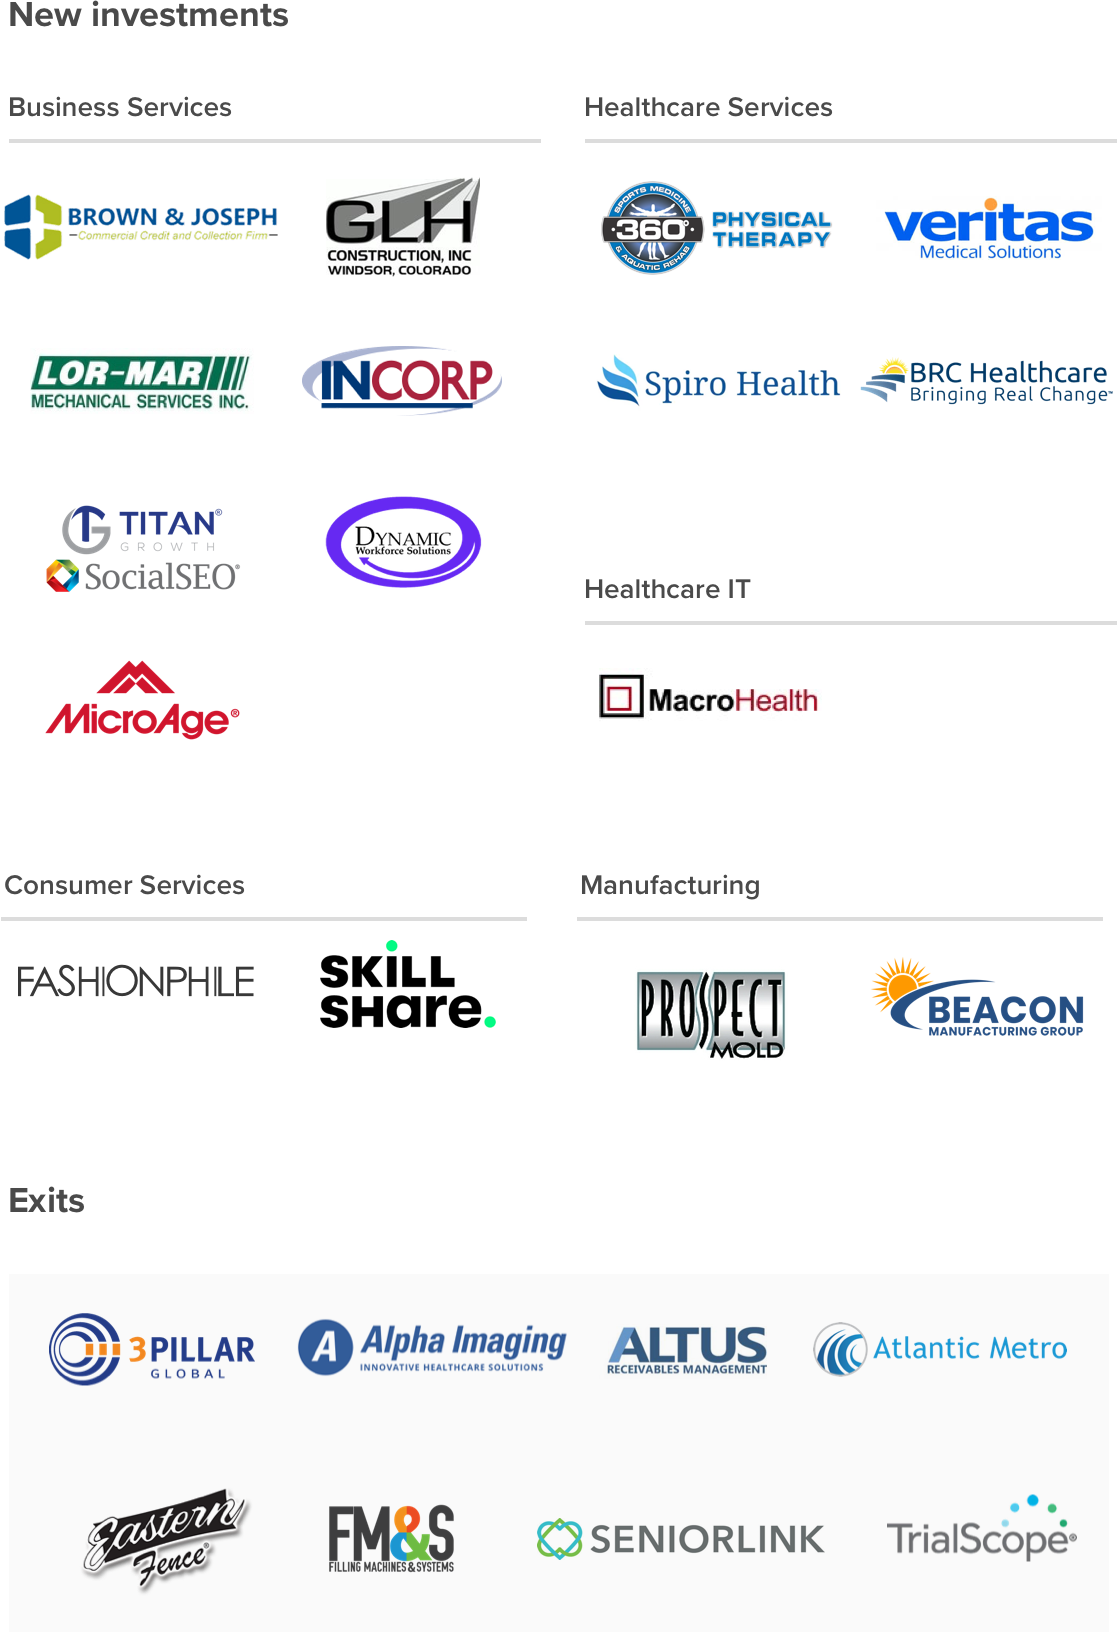 Grid of investments and exited company logos